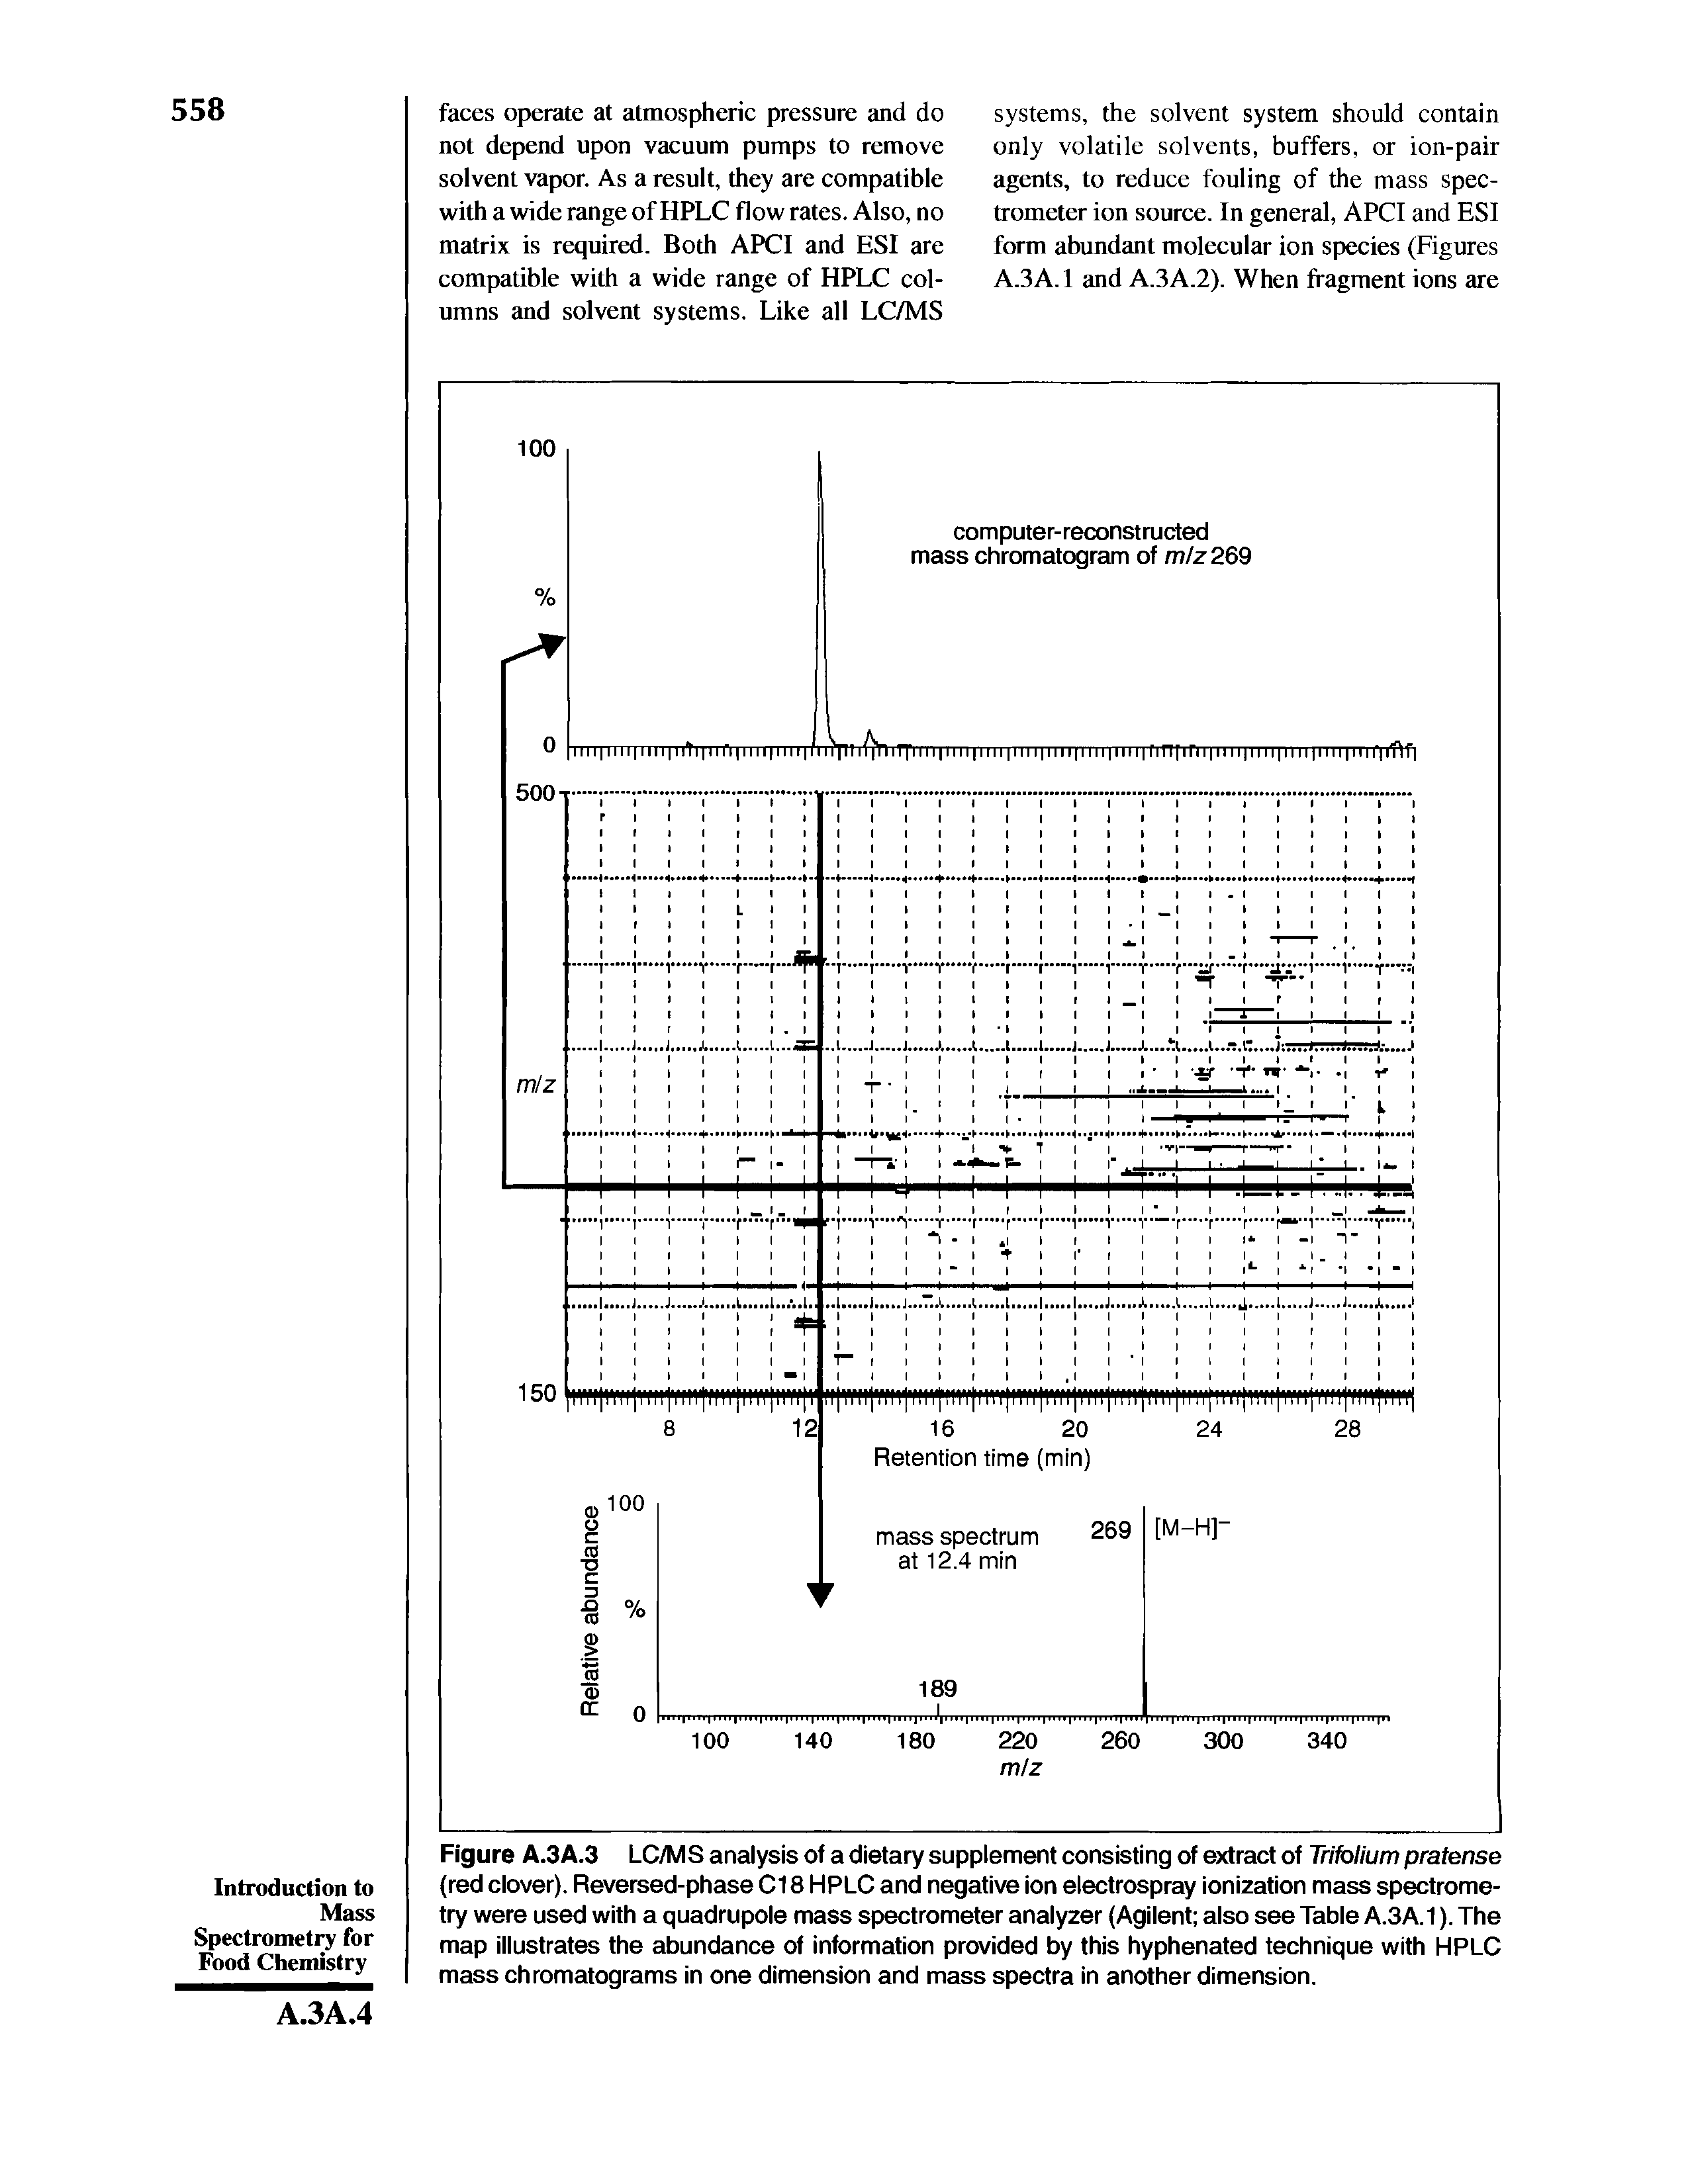 Figure A.3A.3 LC/MS analysis of a dietary supplement consisting of extract of Trifolium pratense (red clover). Reversed-phase C18 HPLC and negative ion electrospray ionization mass spectrometry were used with a quadrupole mass spectrometer analyzer (Agilent also see Table A.3A.1). The map illustrates the abundance of information provided by this hyphenated technique with HPLC mass chromatograms in one dimension and mass spectra in another dimension.